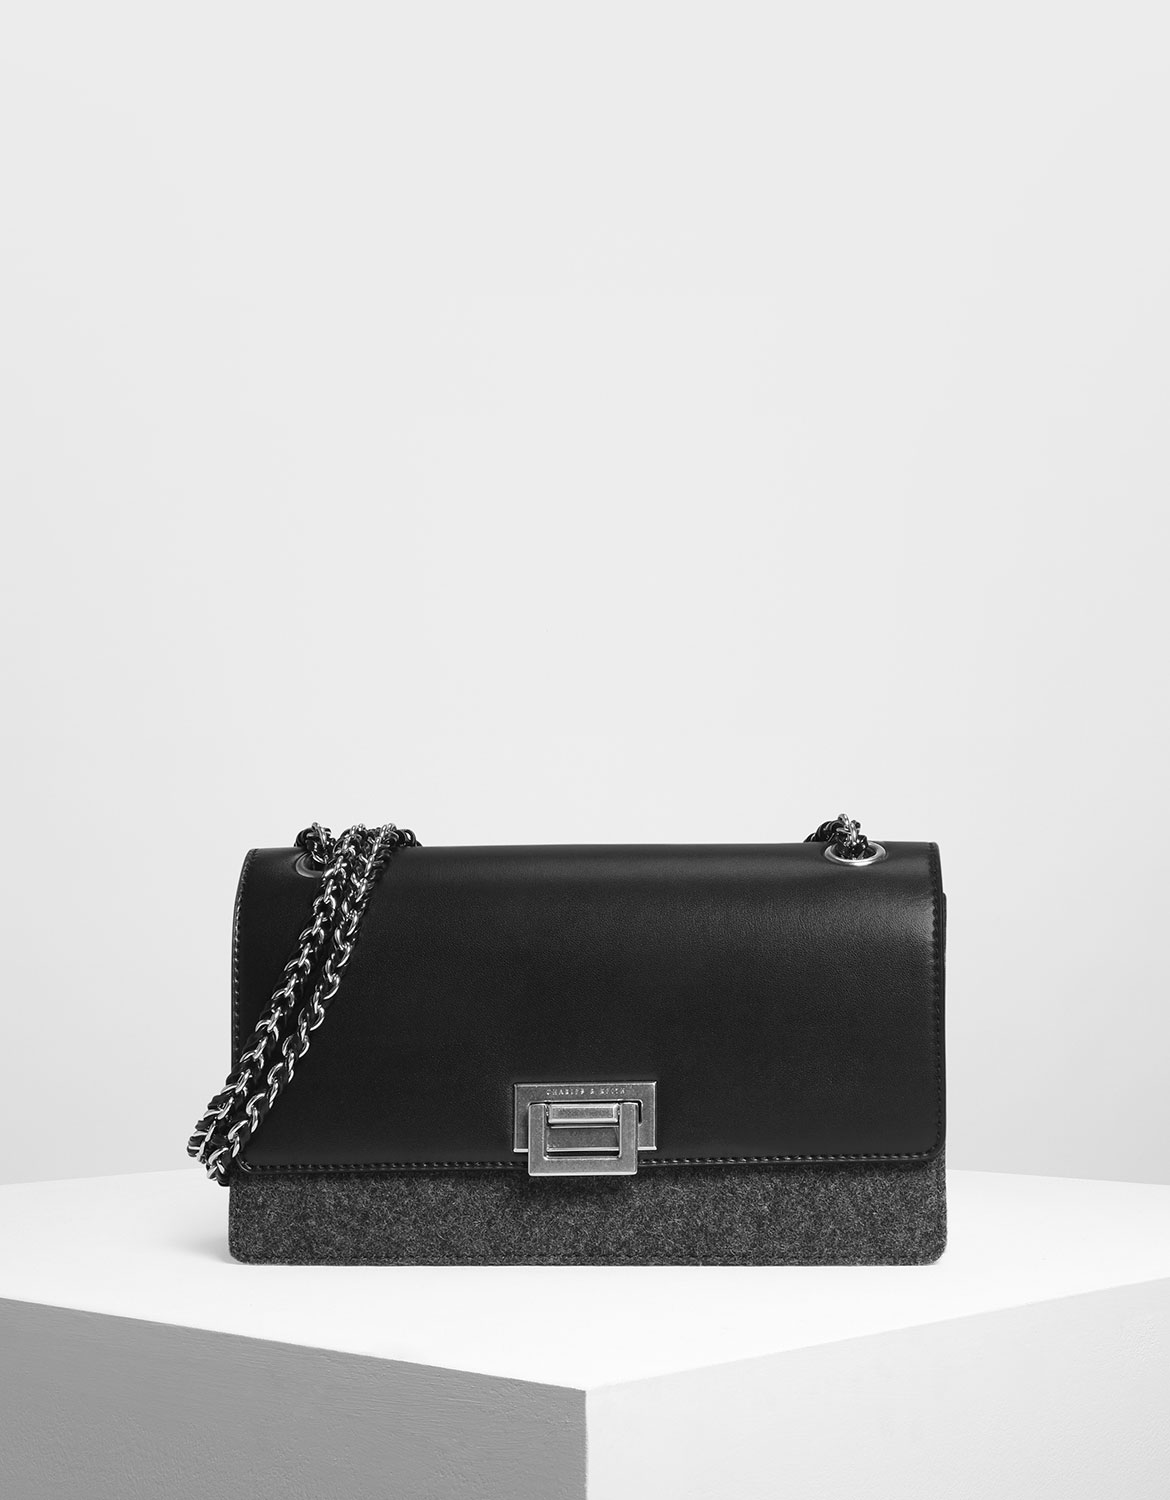 Black Textured Chain Link Shoulder Bag - CHARLES & KEITH ID